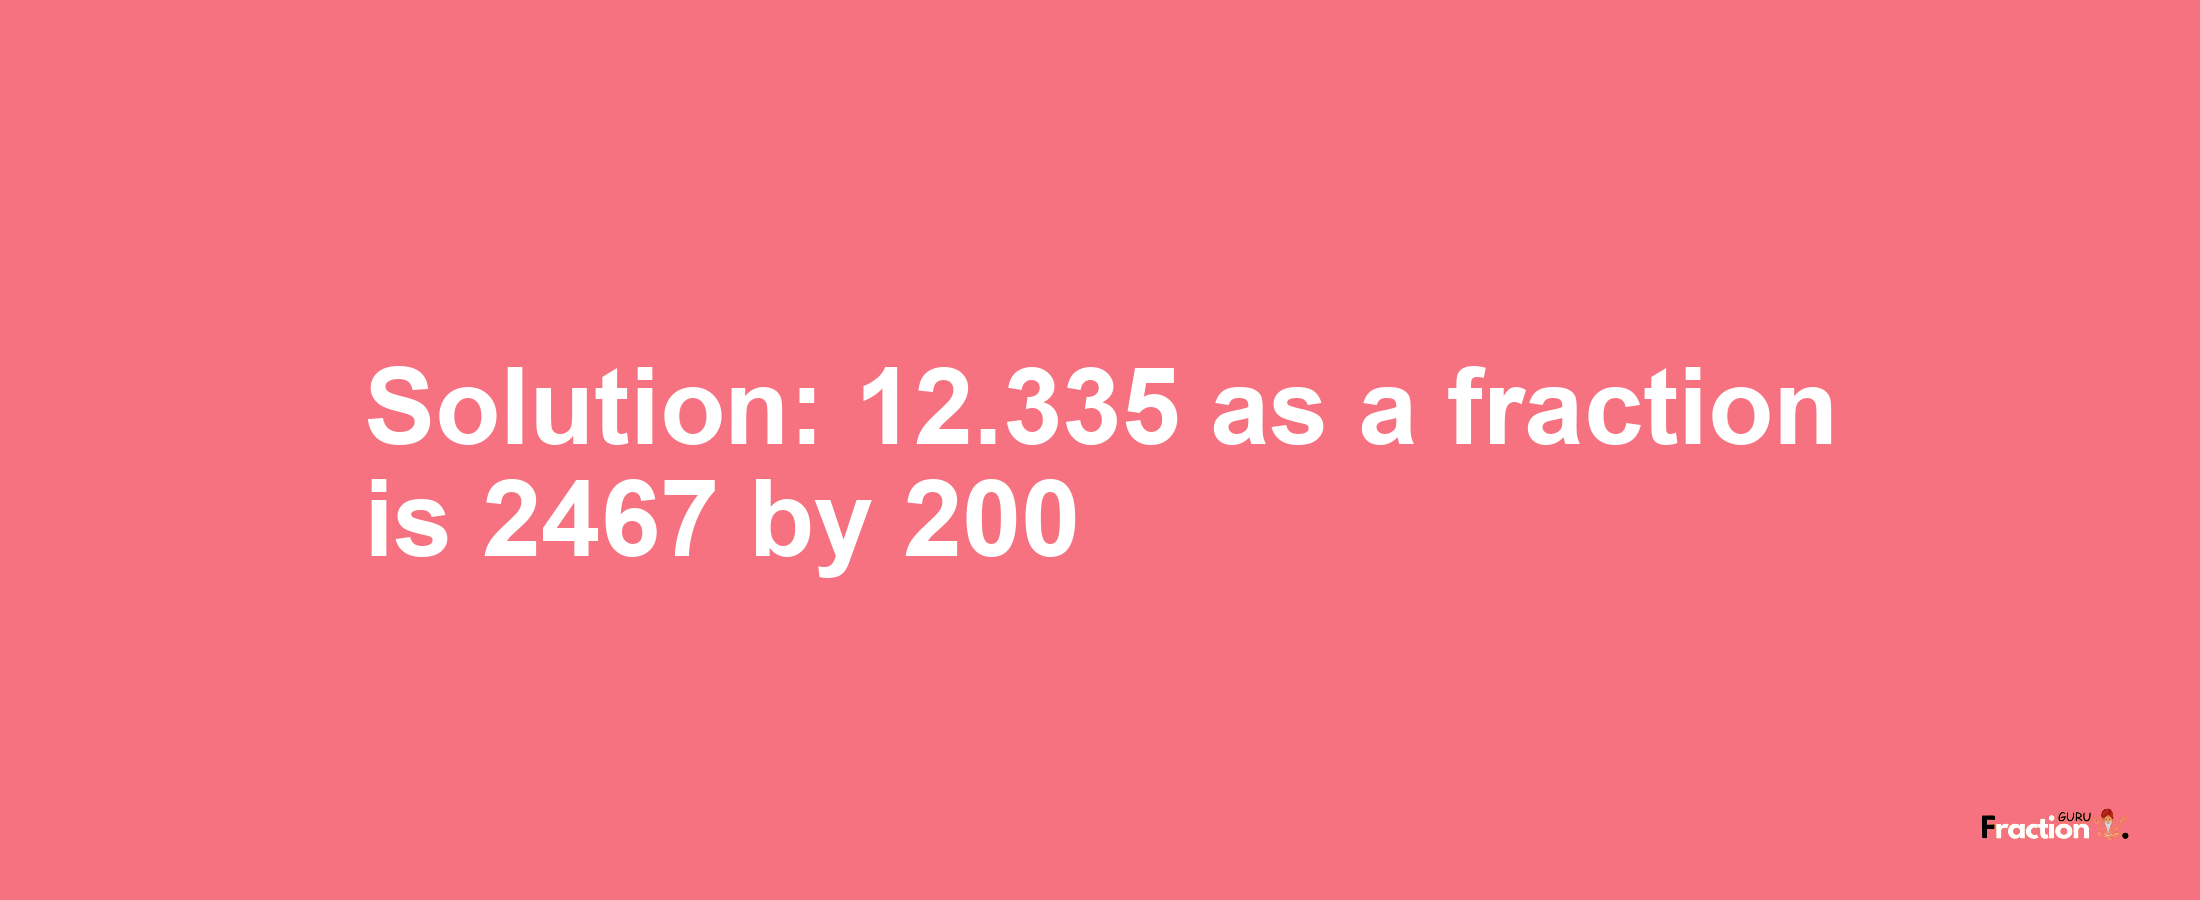 Solution:12.335 as a fraction is 2467/200